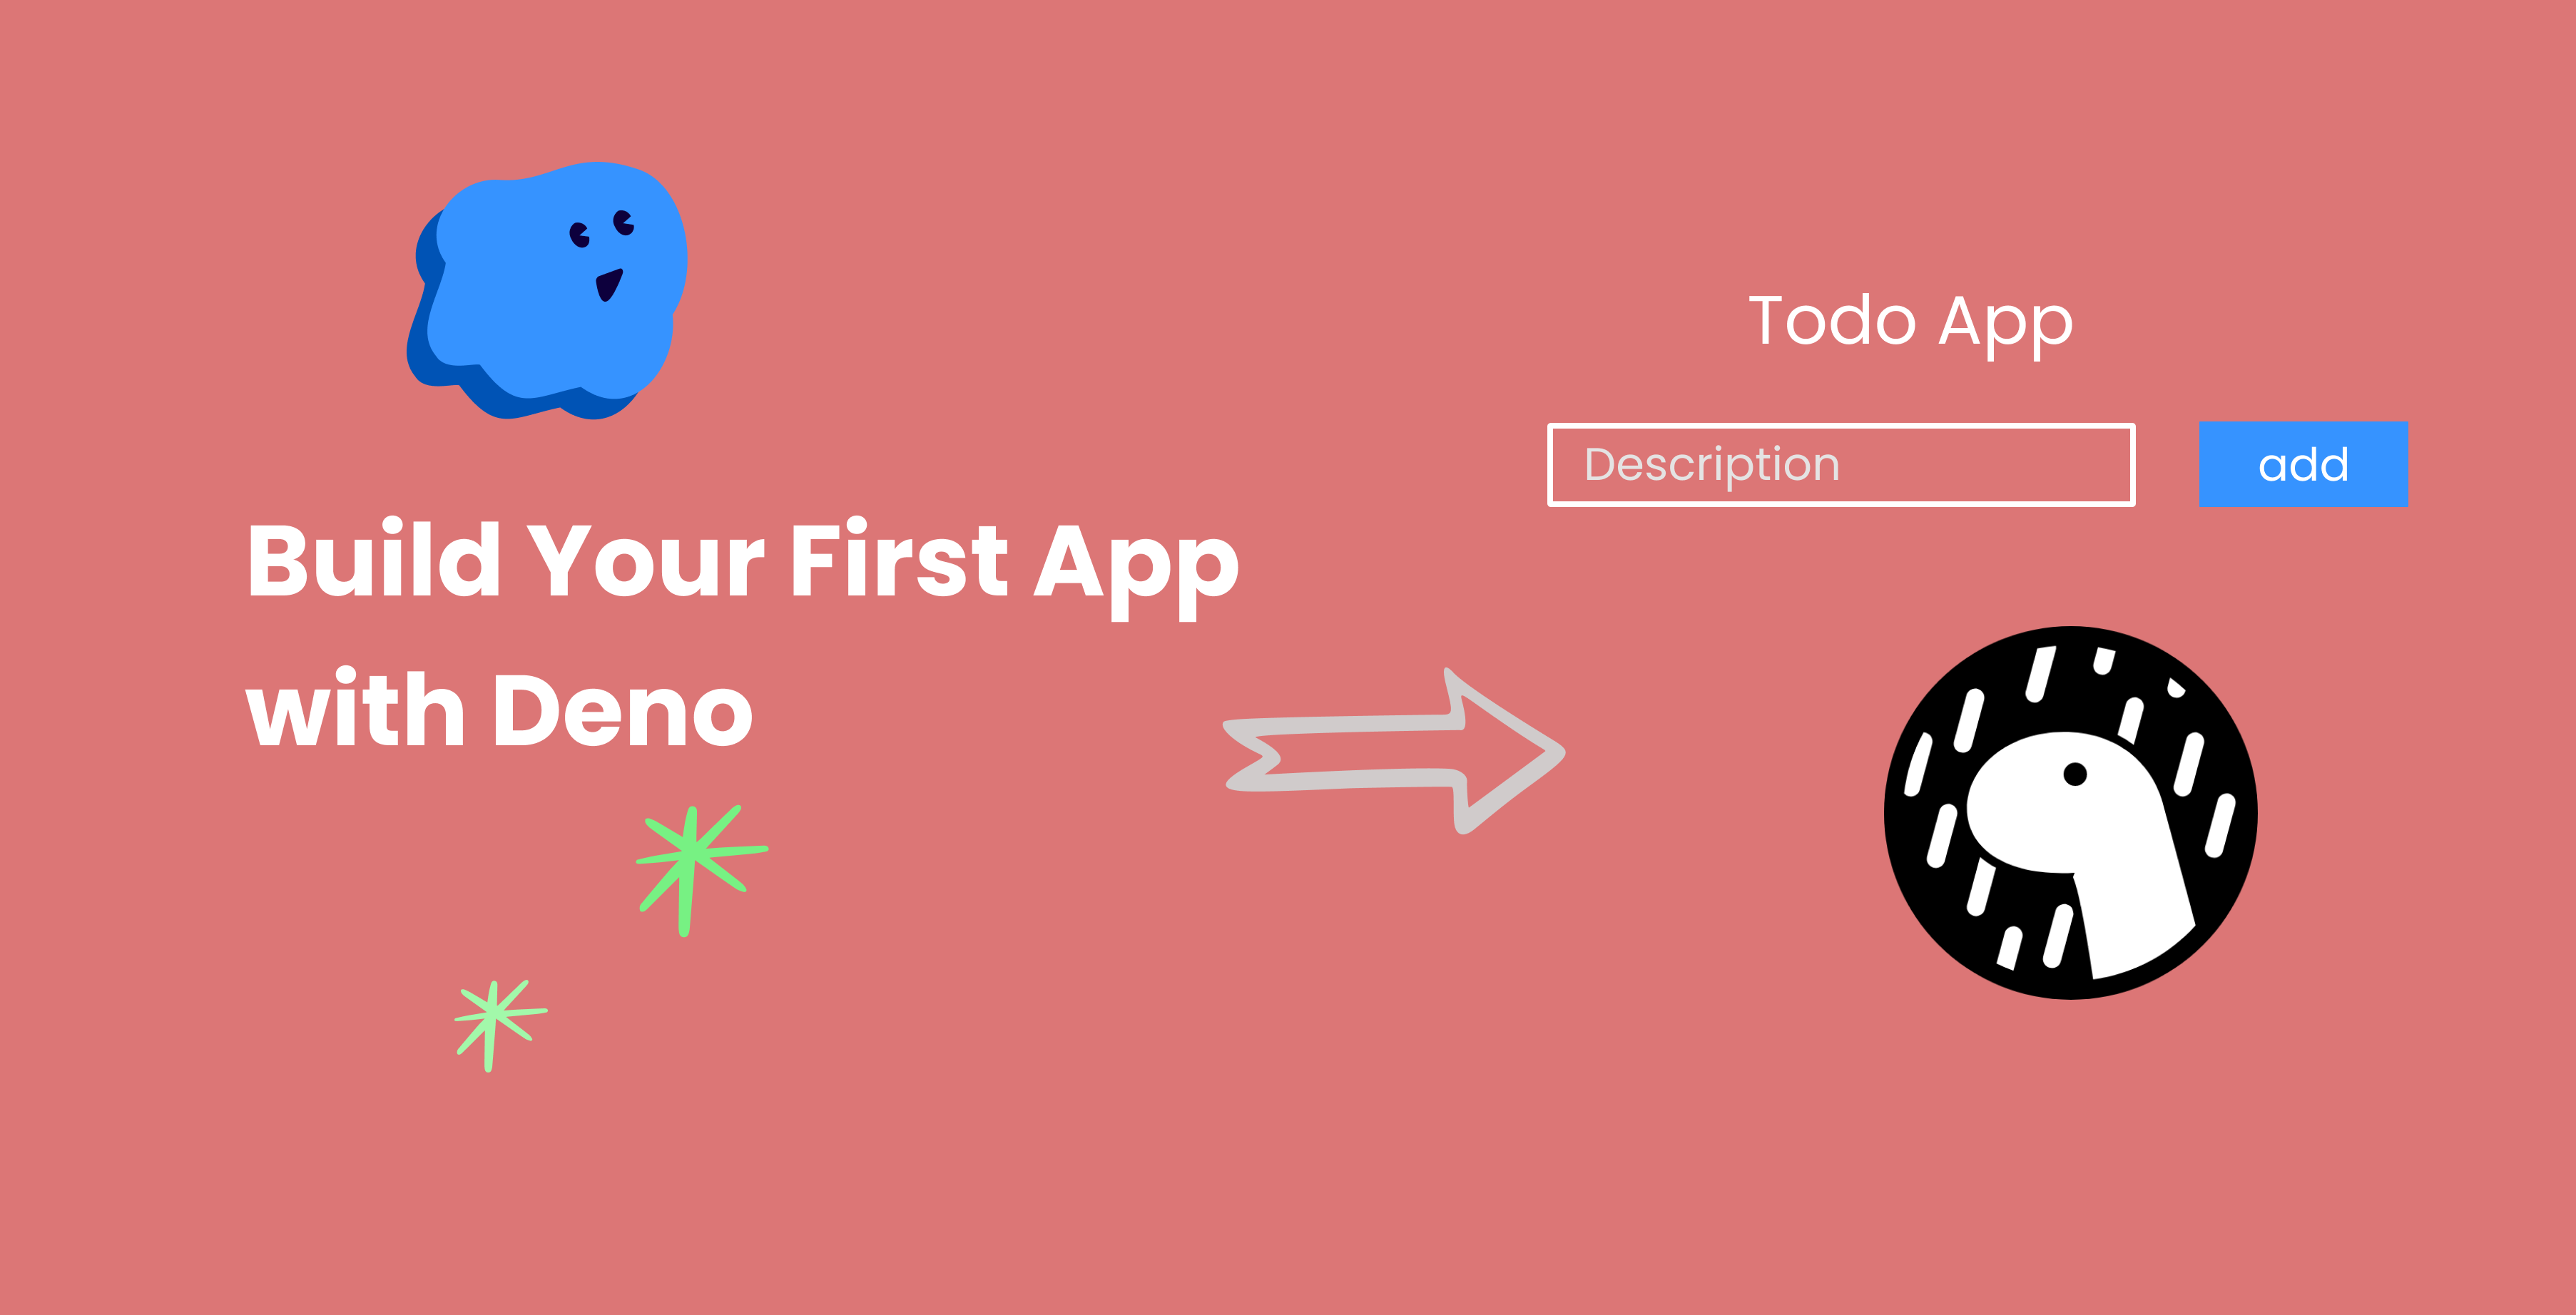 Build Your First App with Deno